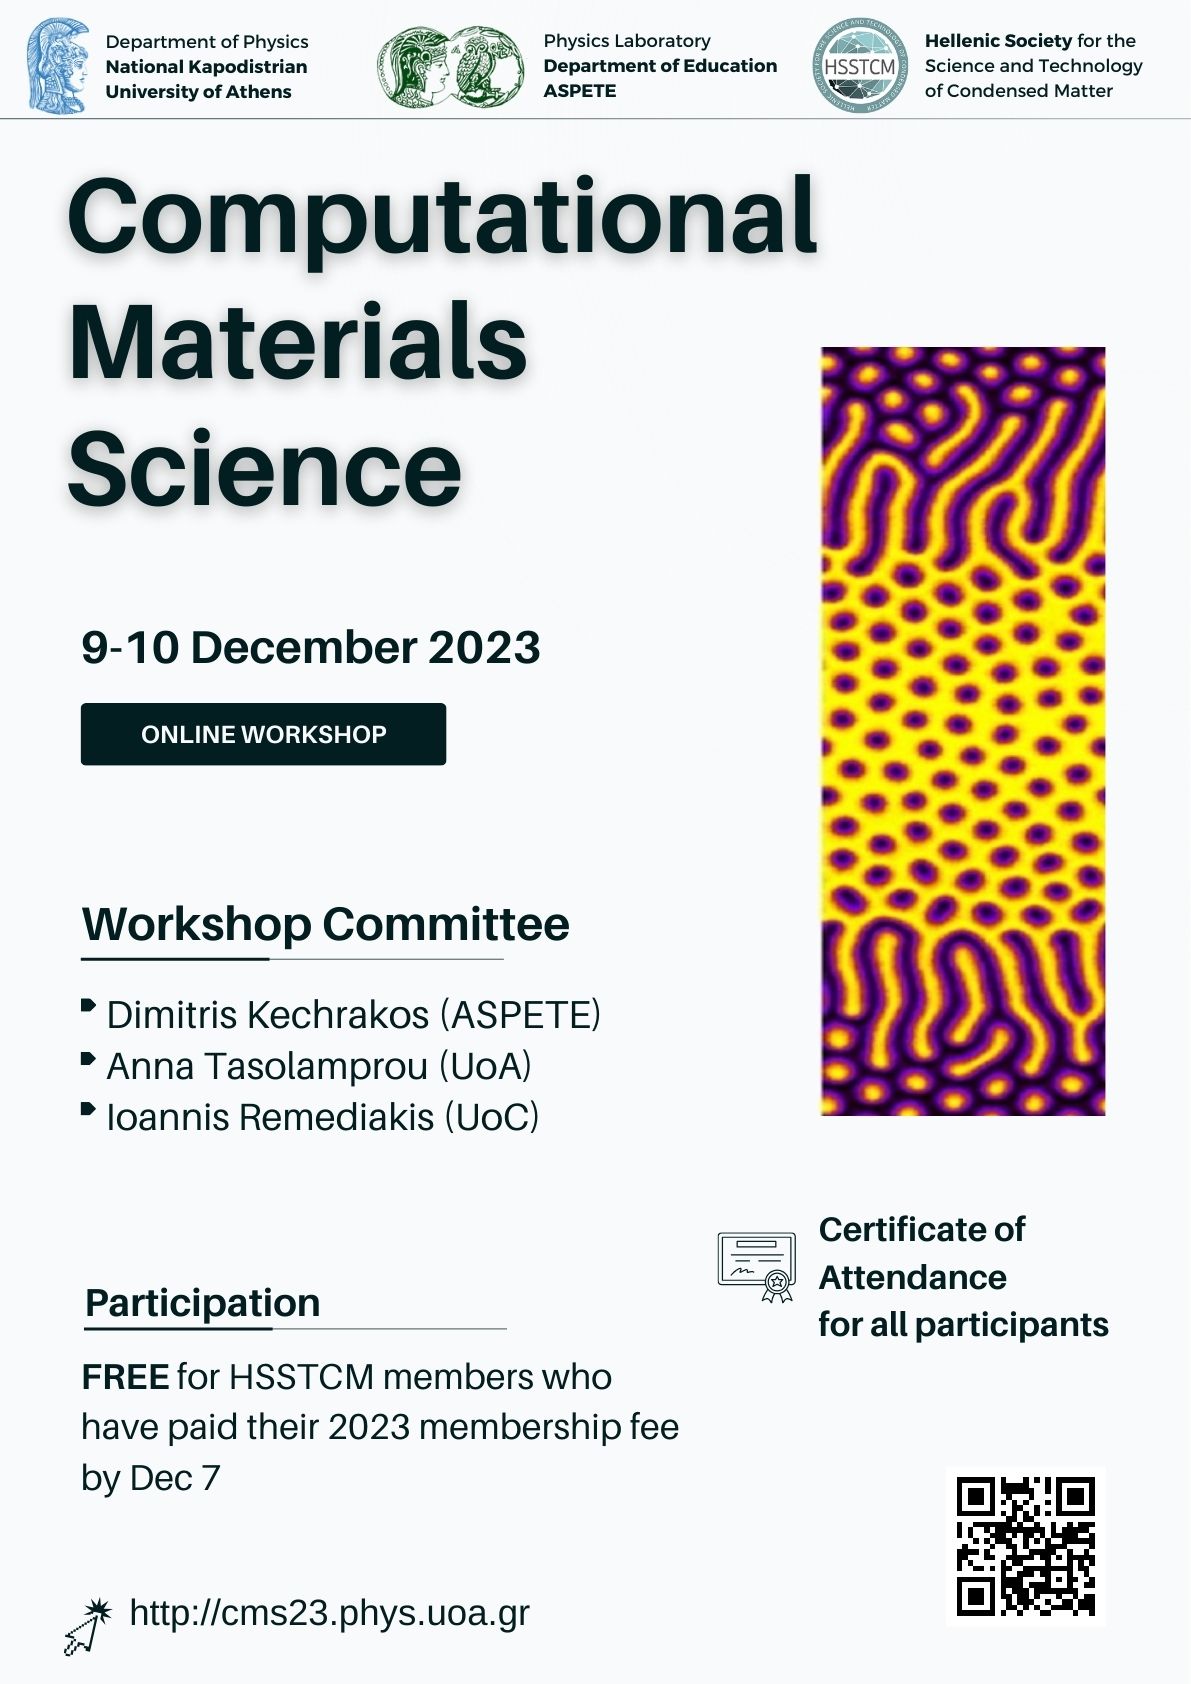 Computational Materials Science 2023 poster